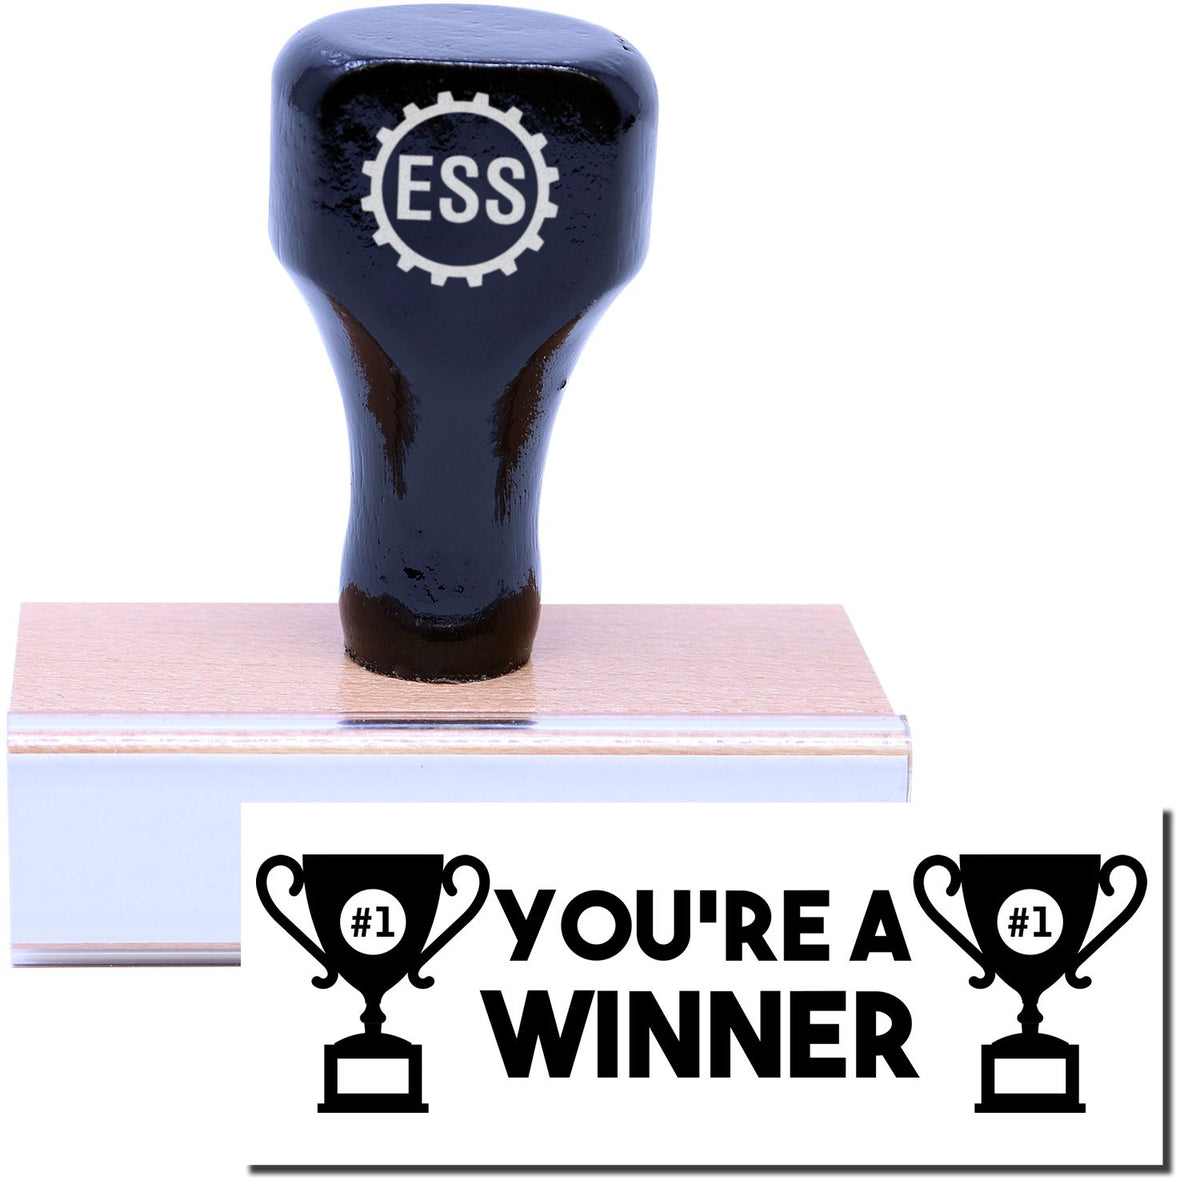 A stock office rubber stamp with a stamped image showing how the text &quot;YOU&#39;RE A WINNER&quot; in bold font and images of a trophy with #1 inside is displayed after stamping.